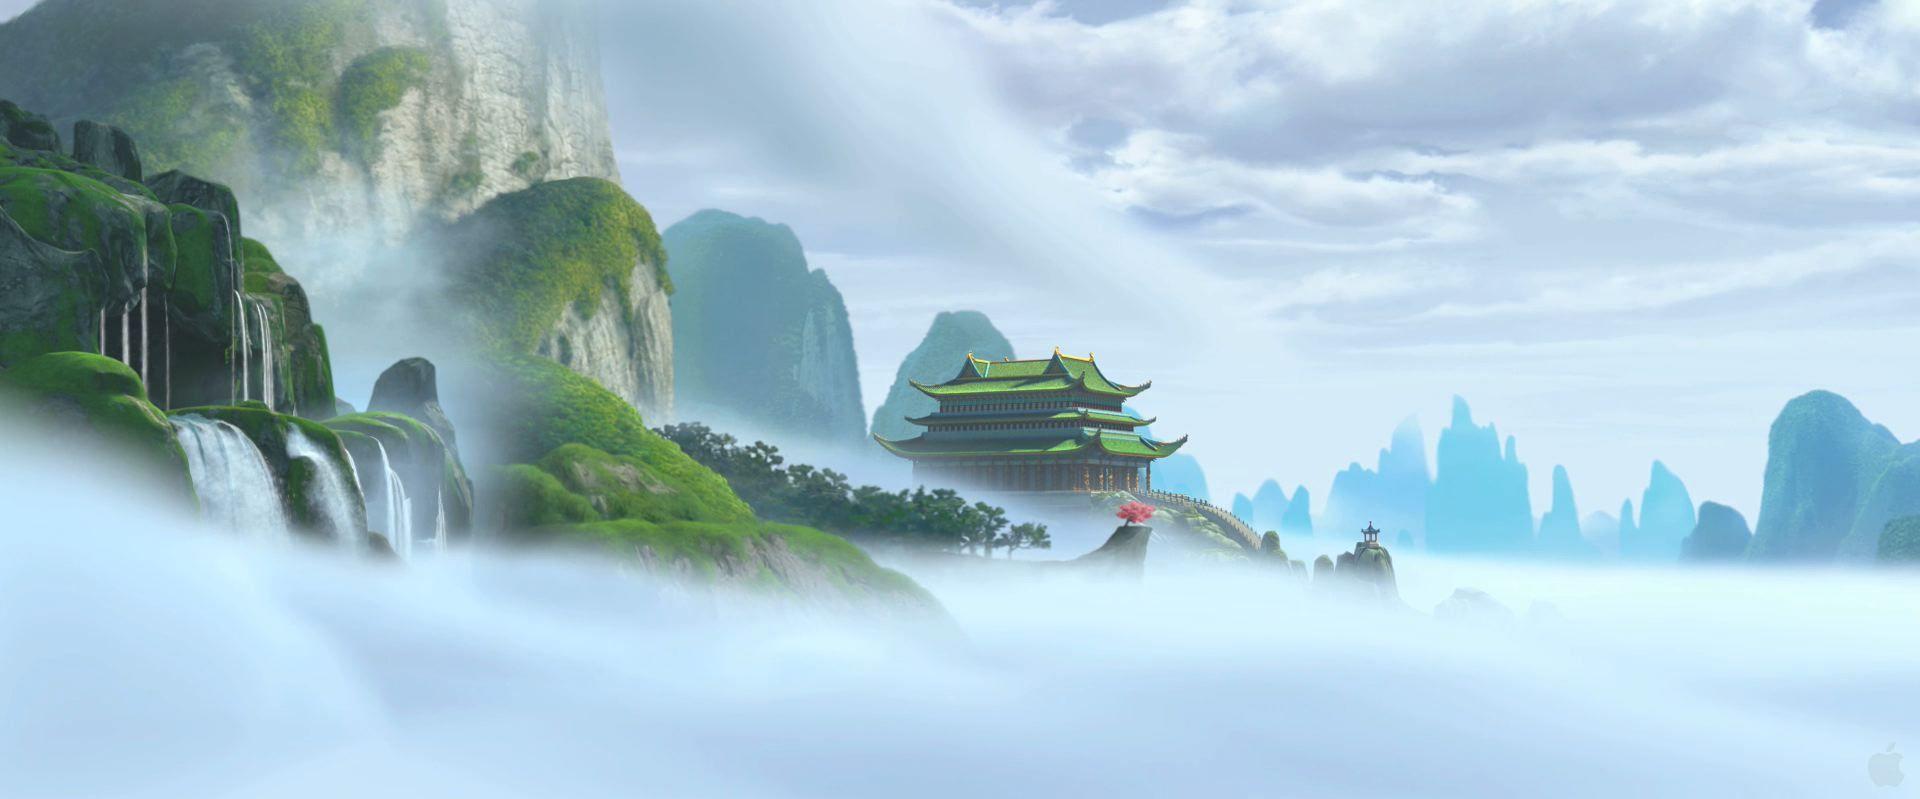 40 Kung Fu Panda HD Wallpapers and Backgrounds